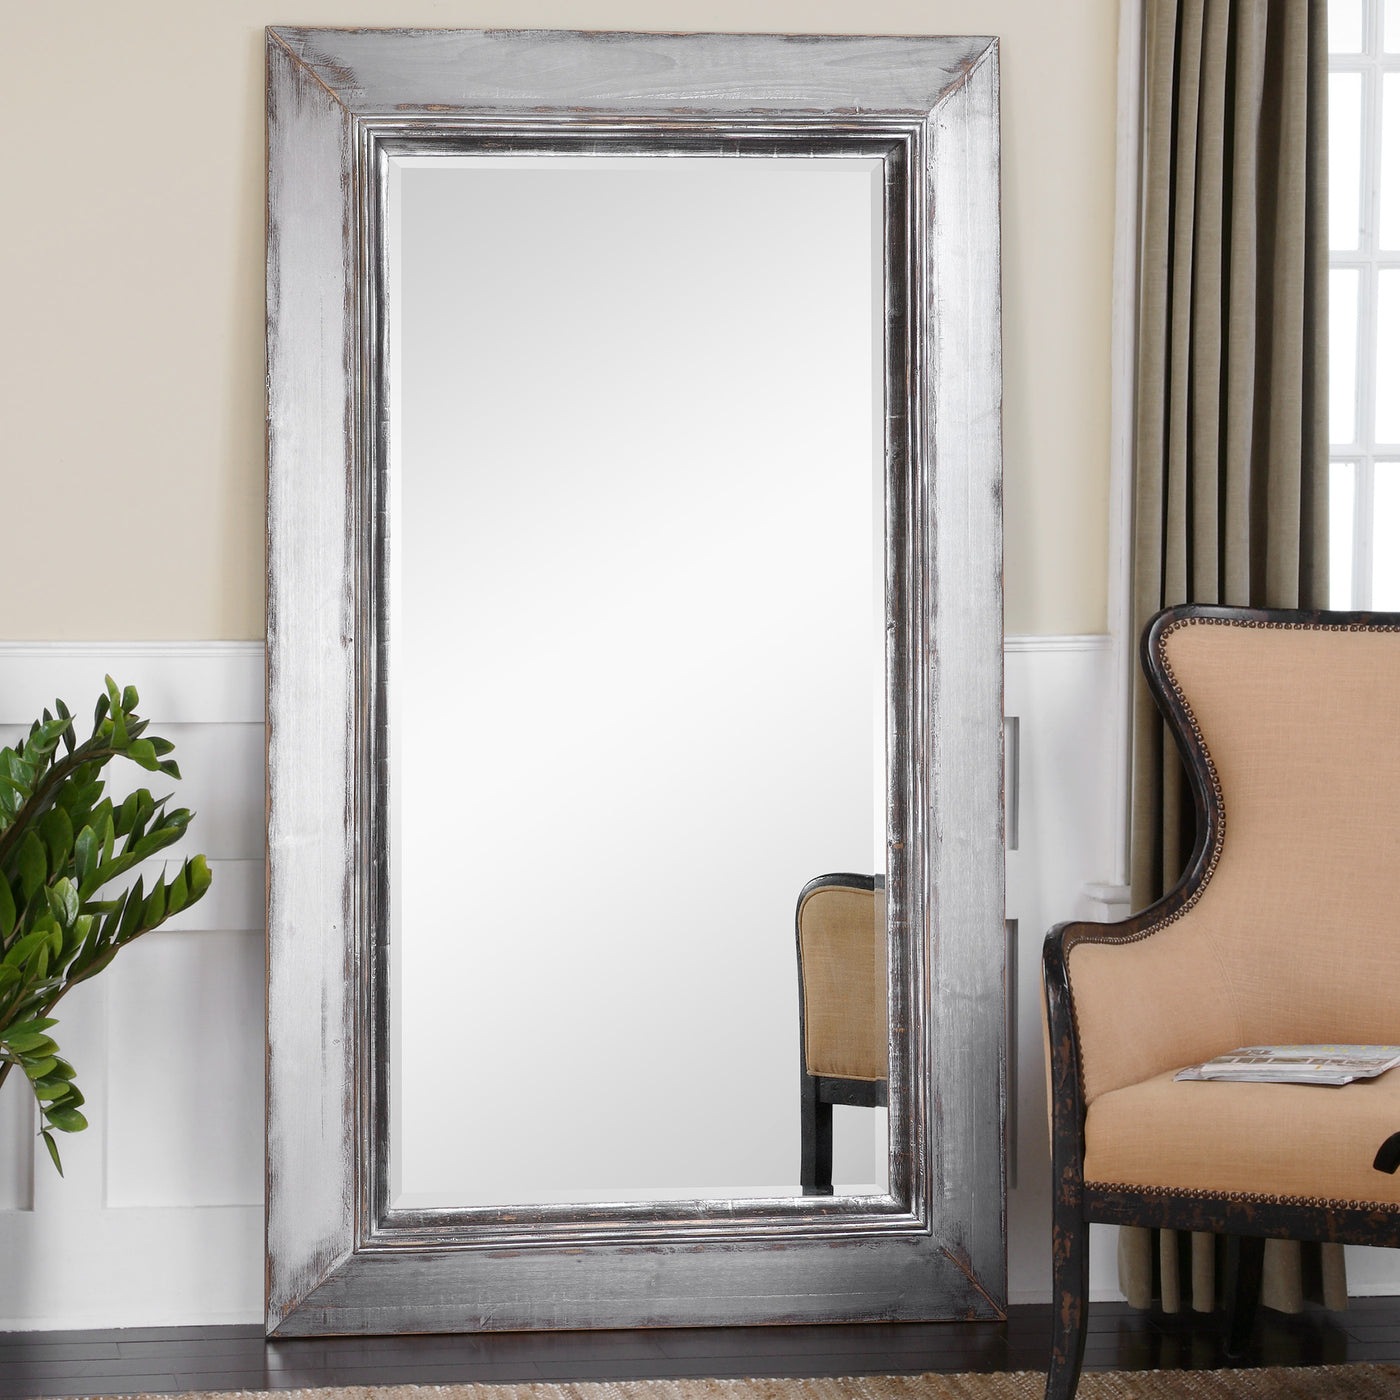 Frame Features A Heavily Distressed, Aged Silver Finish With Rustic Brown And Natural Wood Undertones. Mirror Has A Genero...